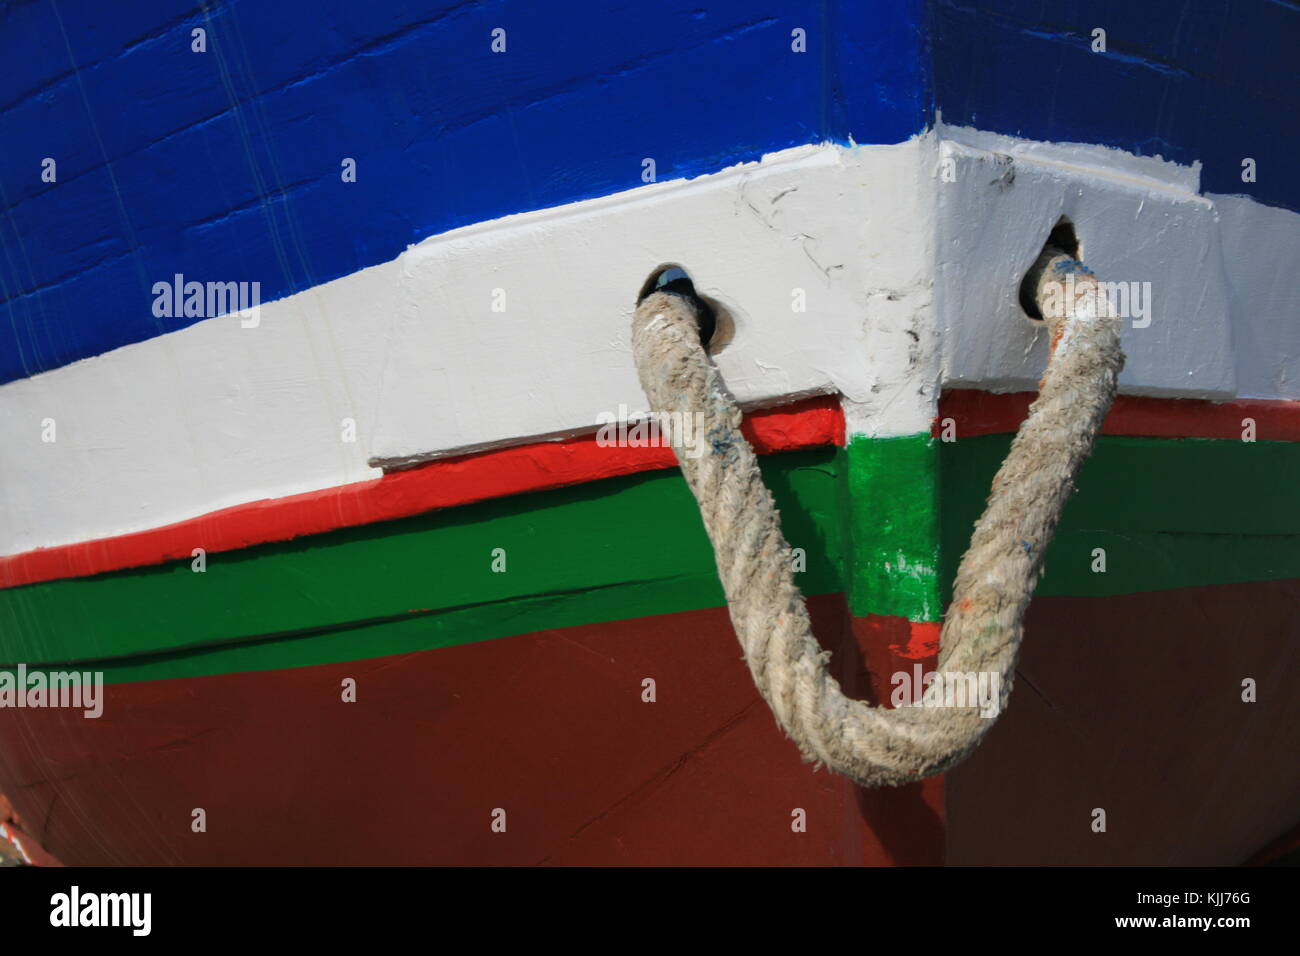 detail of the front of a colored wooden boat wih a small rope Stock Photo